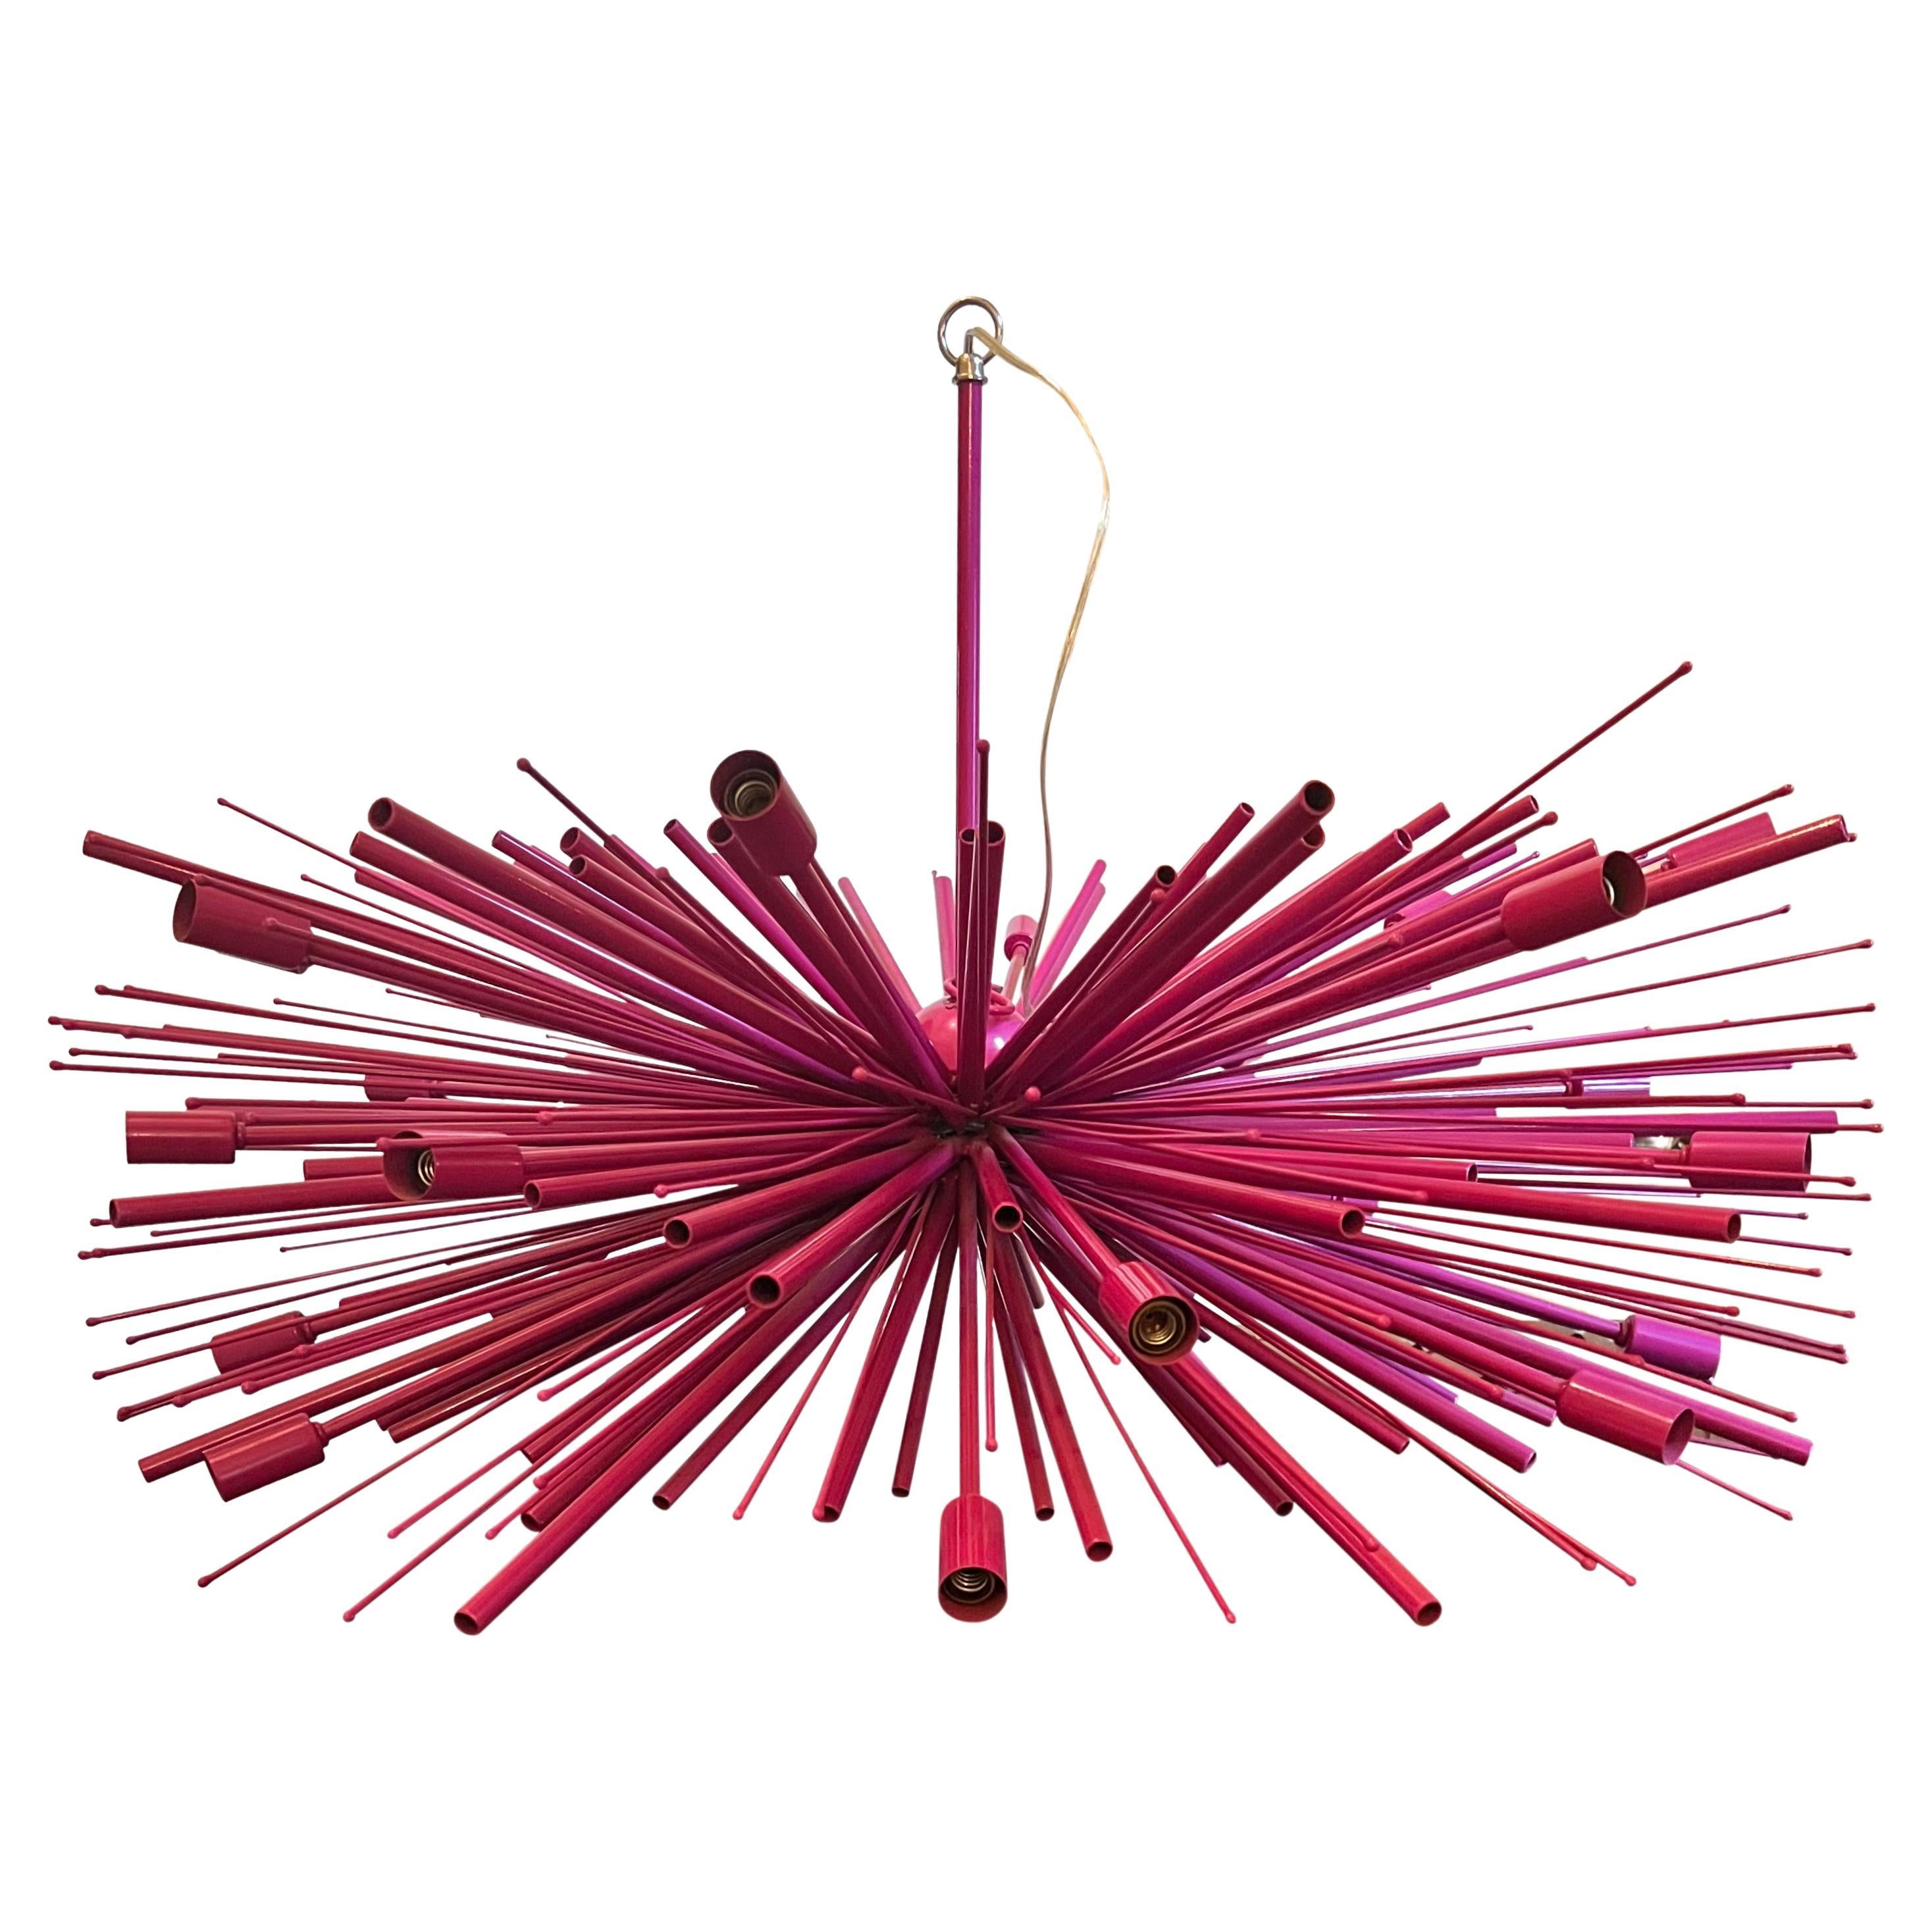 Custom Supernova chandelier in powder-coated steel, original by Lou Blass. Offered in wild fuchsia finish with 24 lights with candelabra bases (maximum of 60 watts per socket). Chandelier is in good working order and comes with a 28